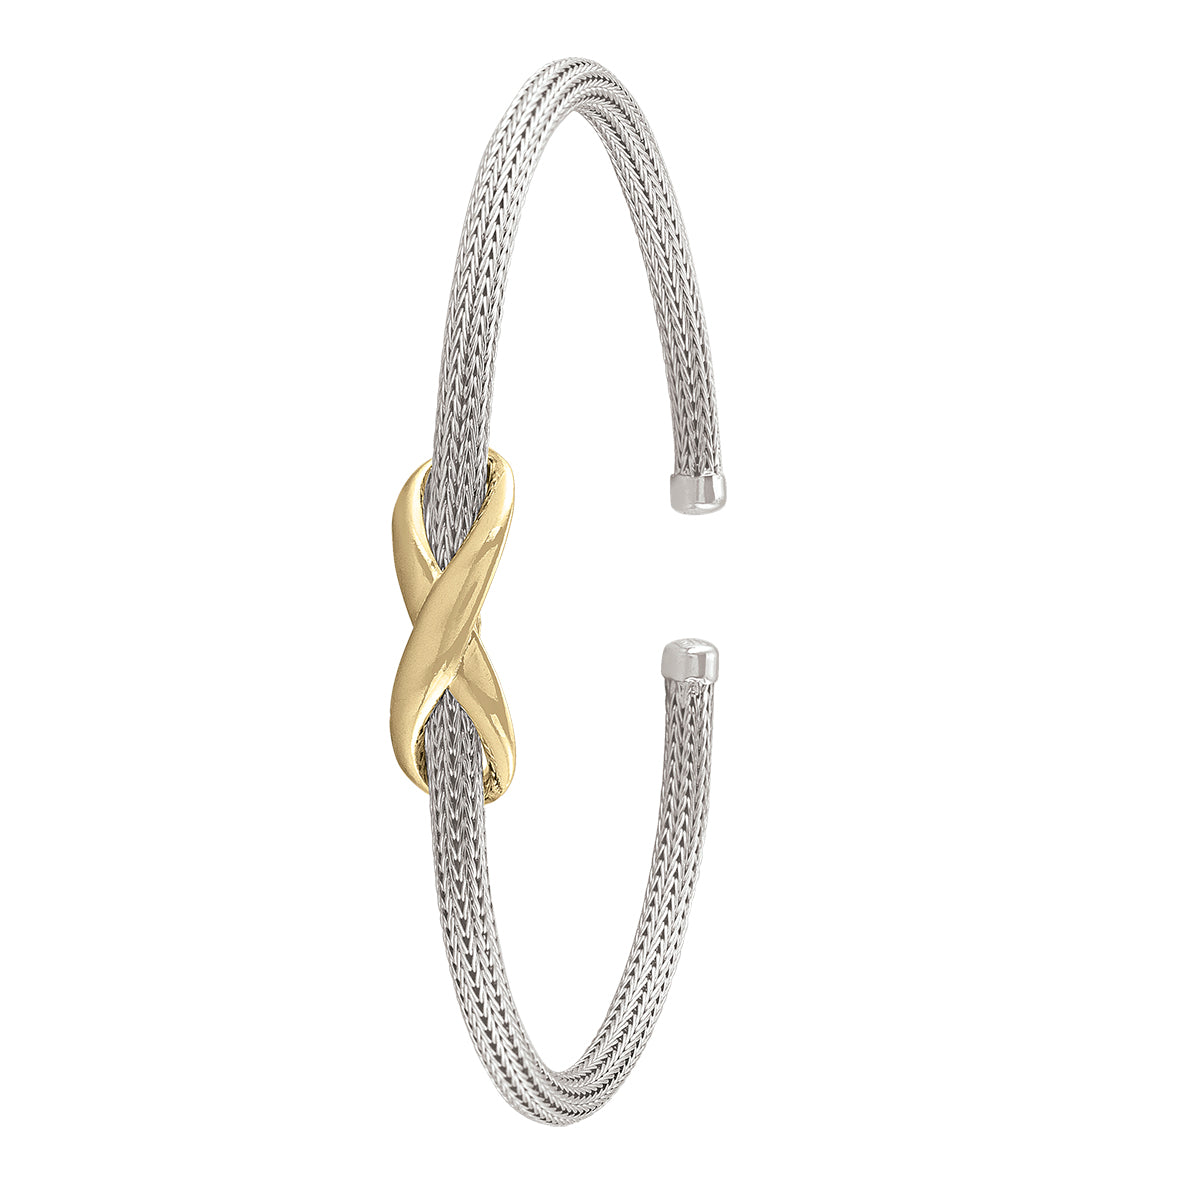 STERLING SILVER YELLOW GOLD AND RHODIUM "X" BANGLE